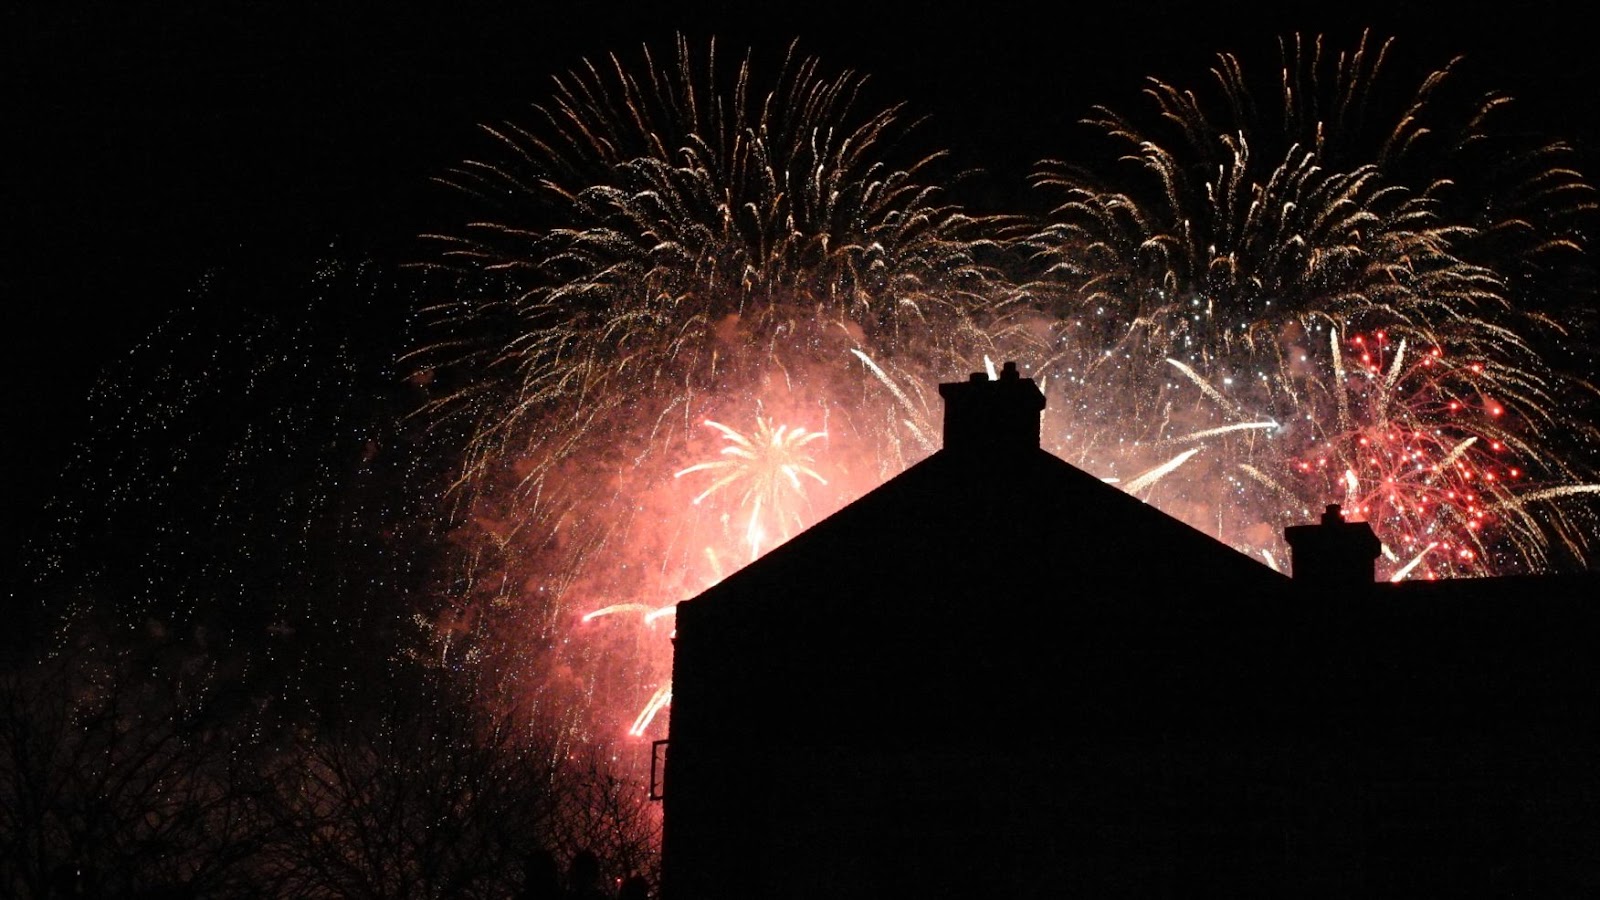 Fireworks exploding behind the silhouette of a home